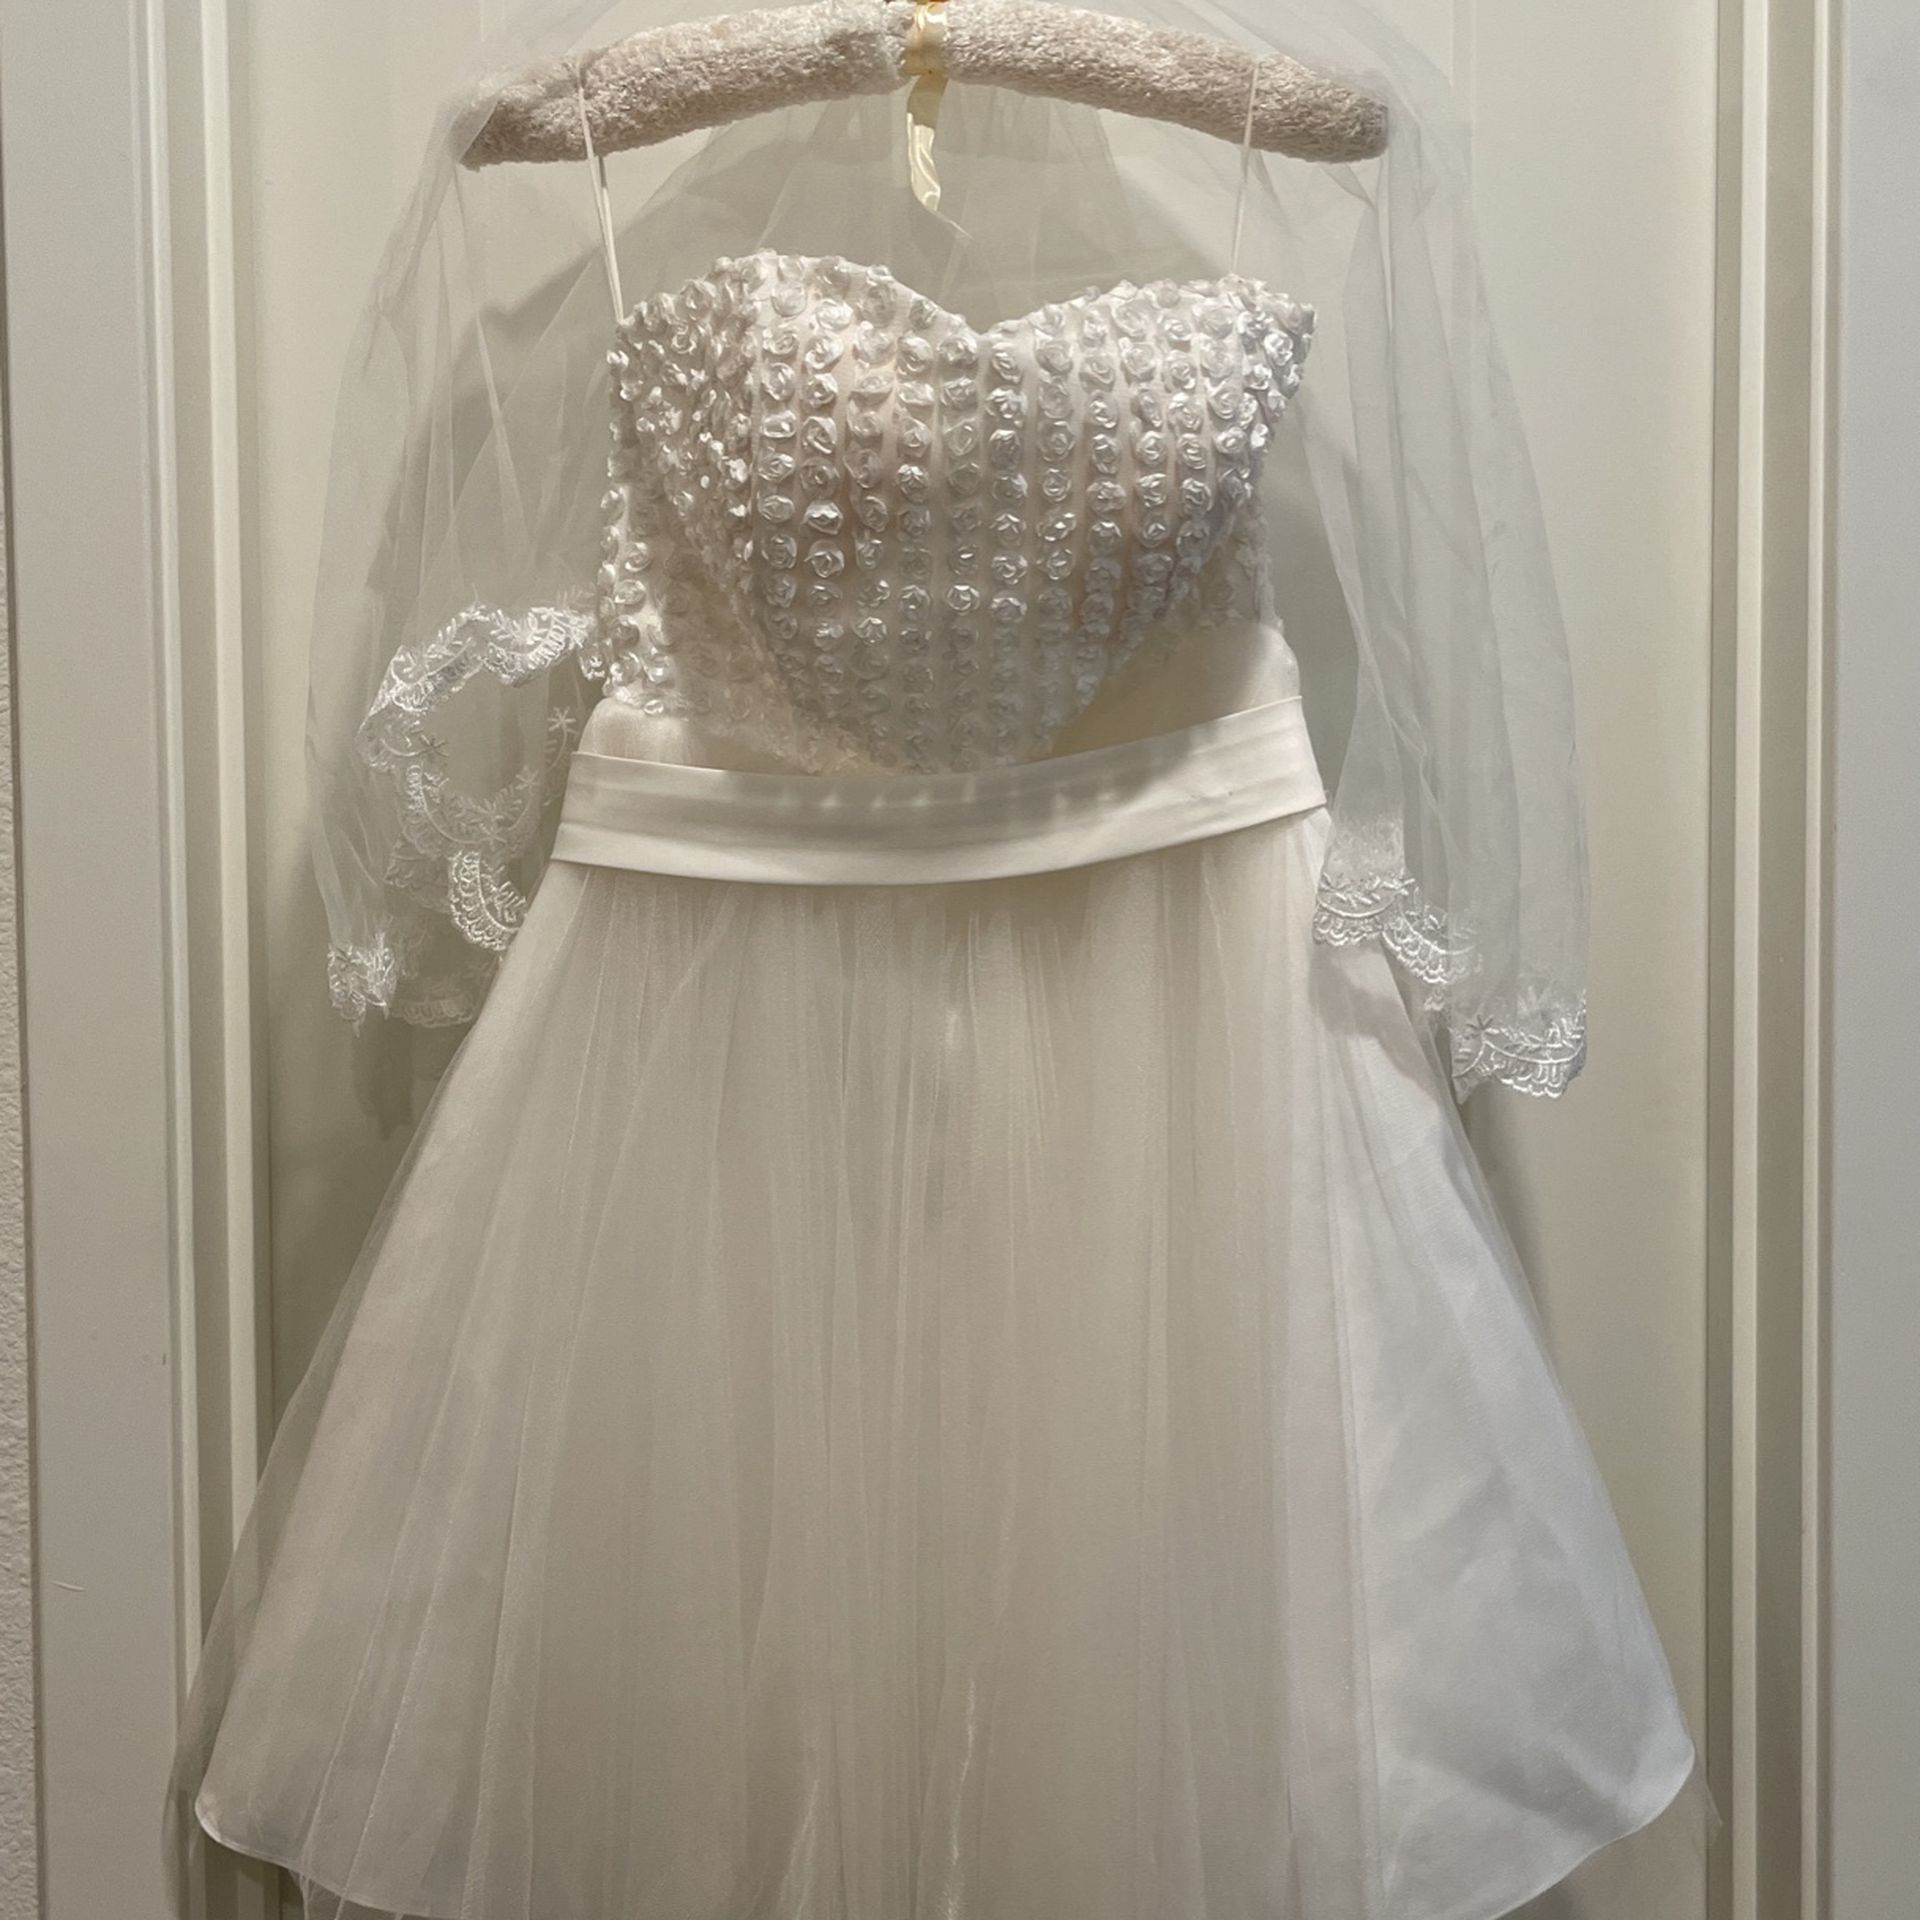 Short White Dress with veil For wedding/event